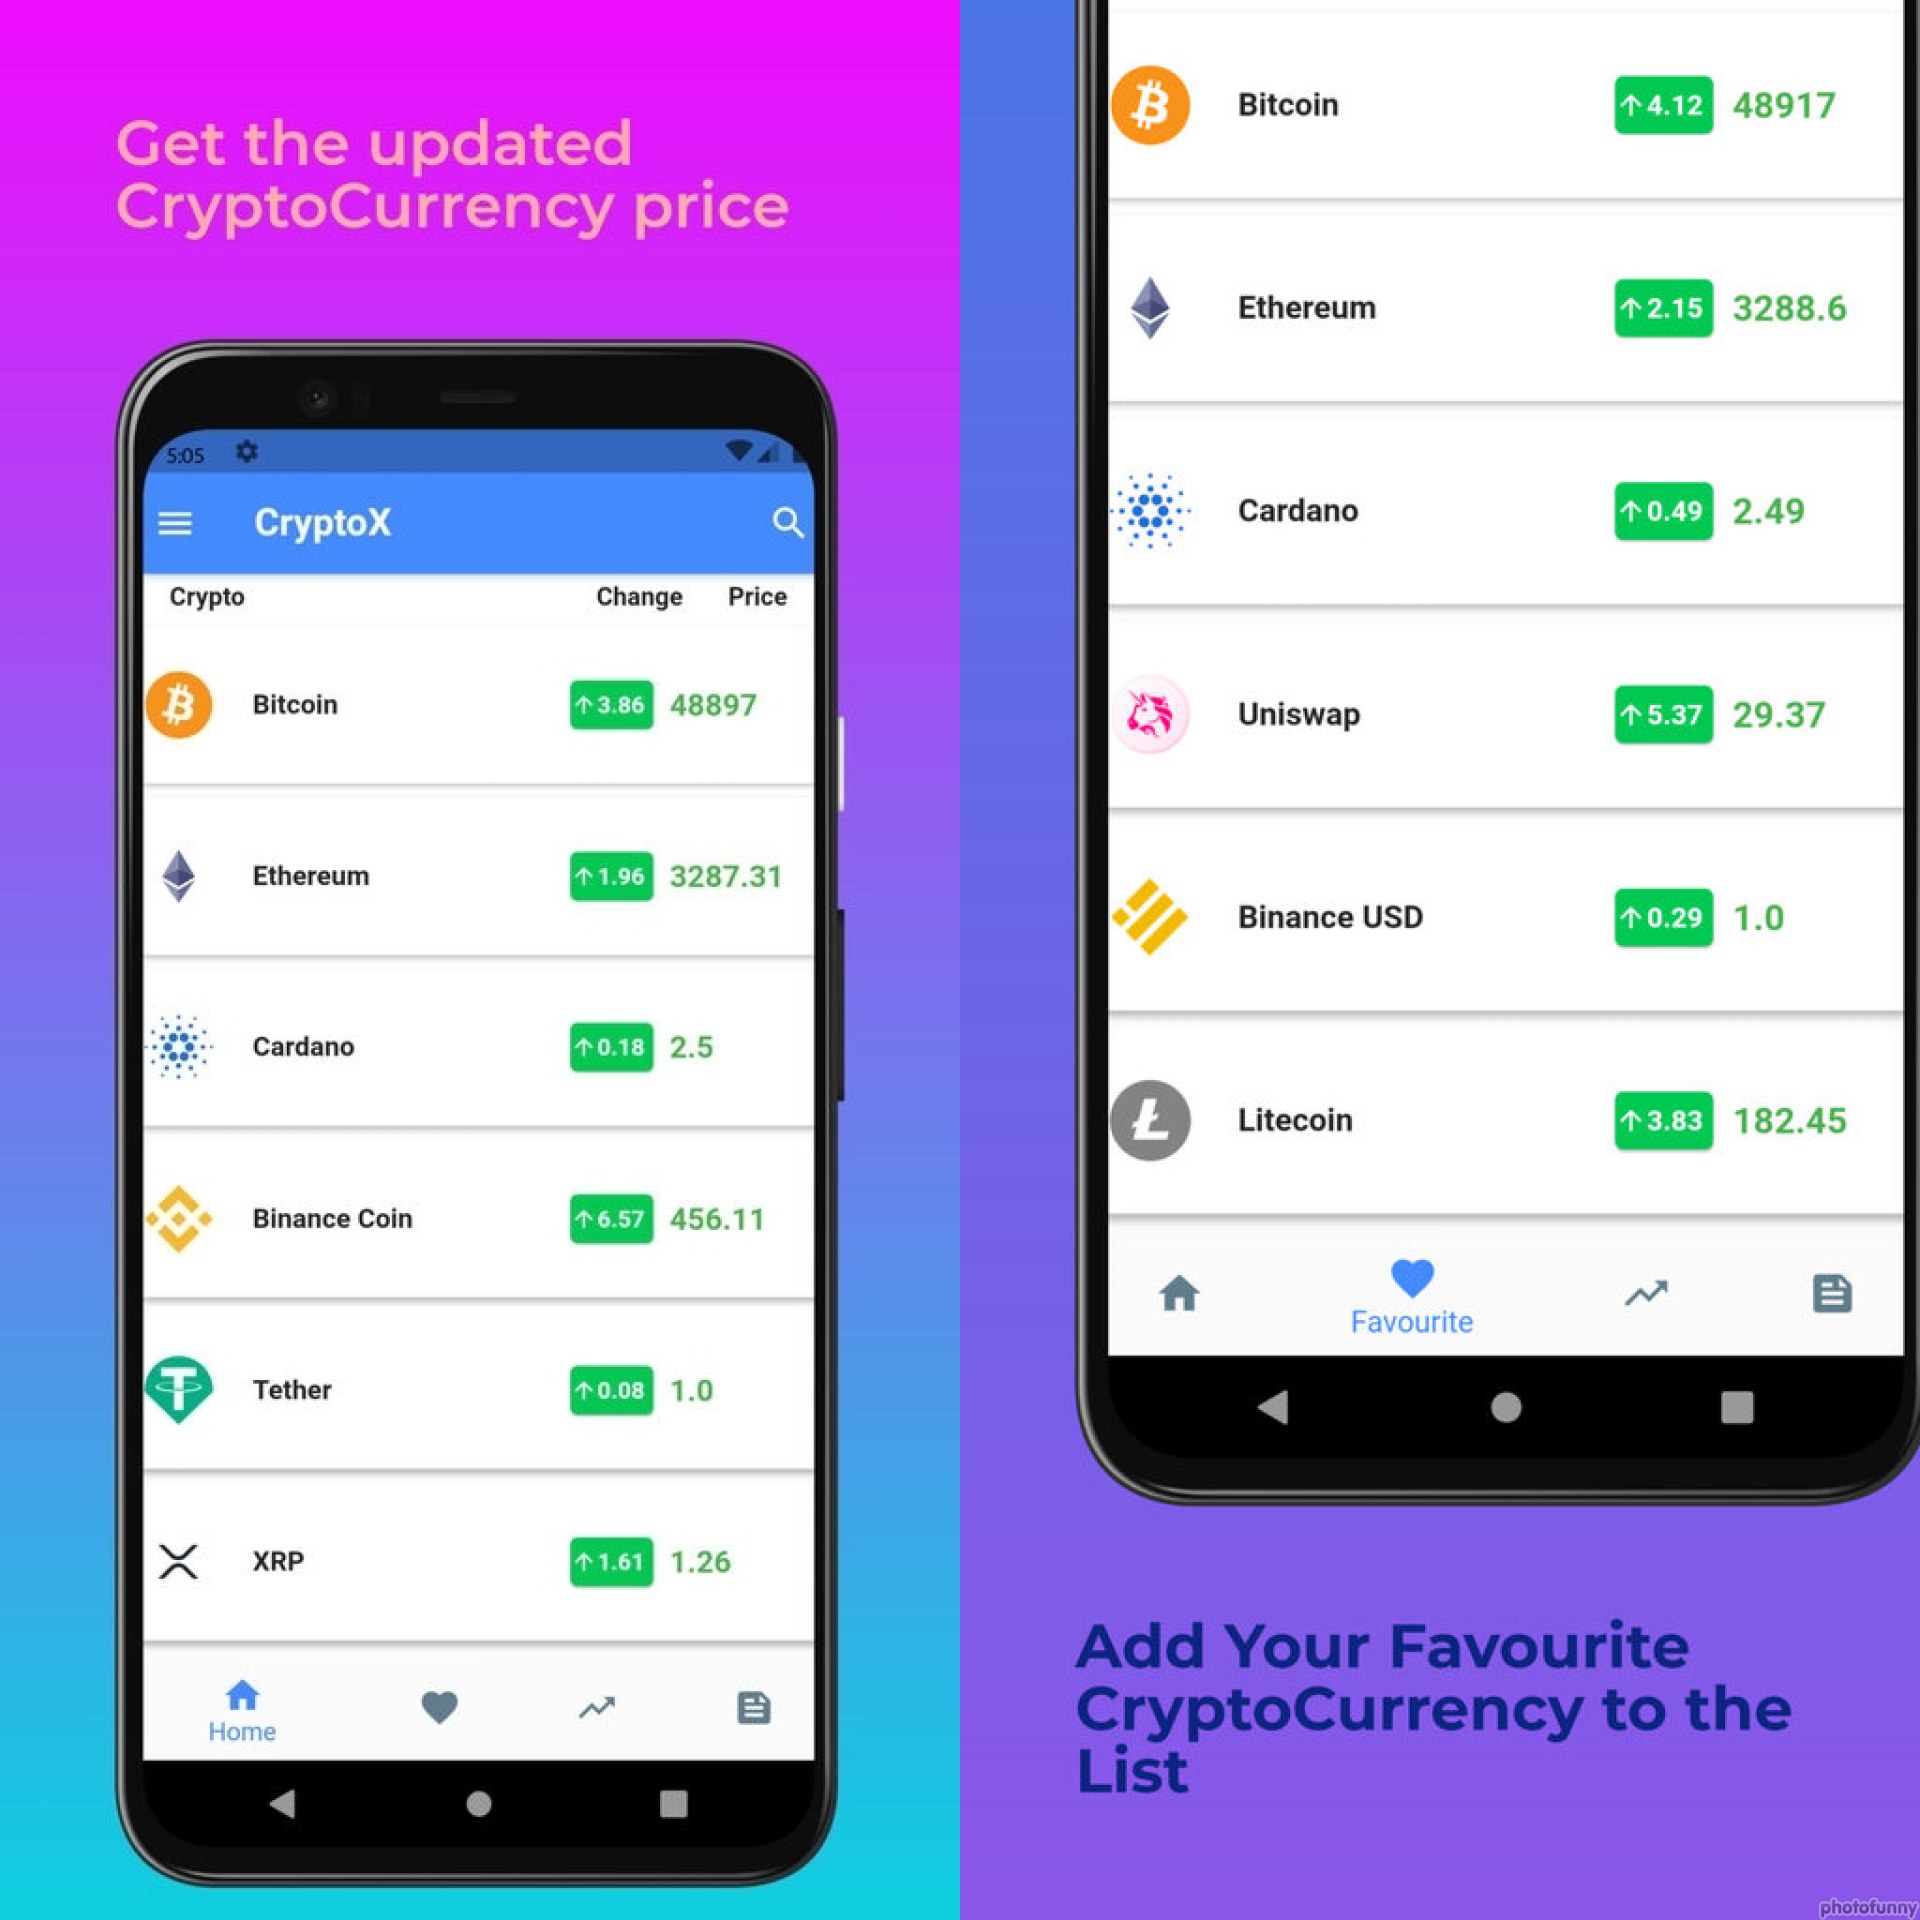 An Android App for Cryptocurreny Data Price,Market cap,etc Using Flutter